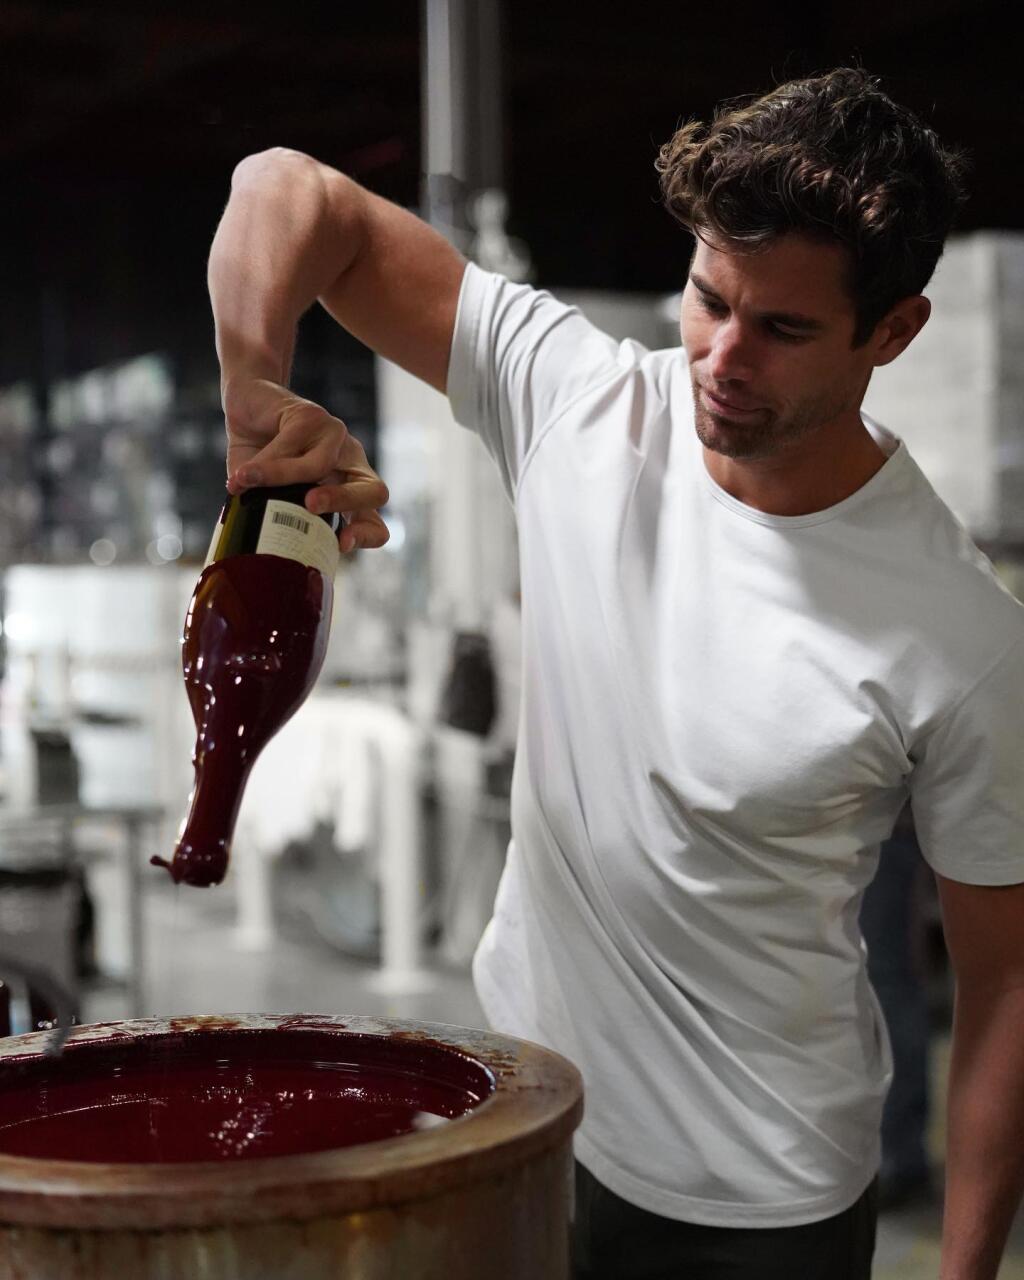 Chasen Nick, contestant on season 16 of “The Bachelorette,” dips a wine bottle in wax during his visit to Belle Glos. (Copper Cane Wines)